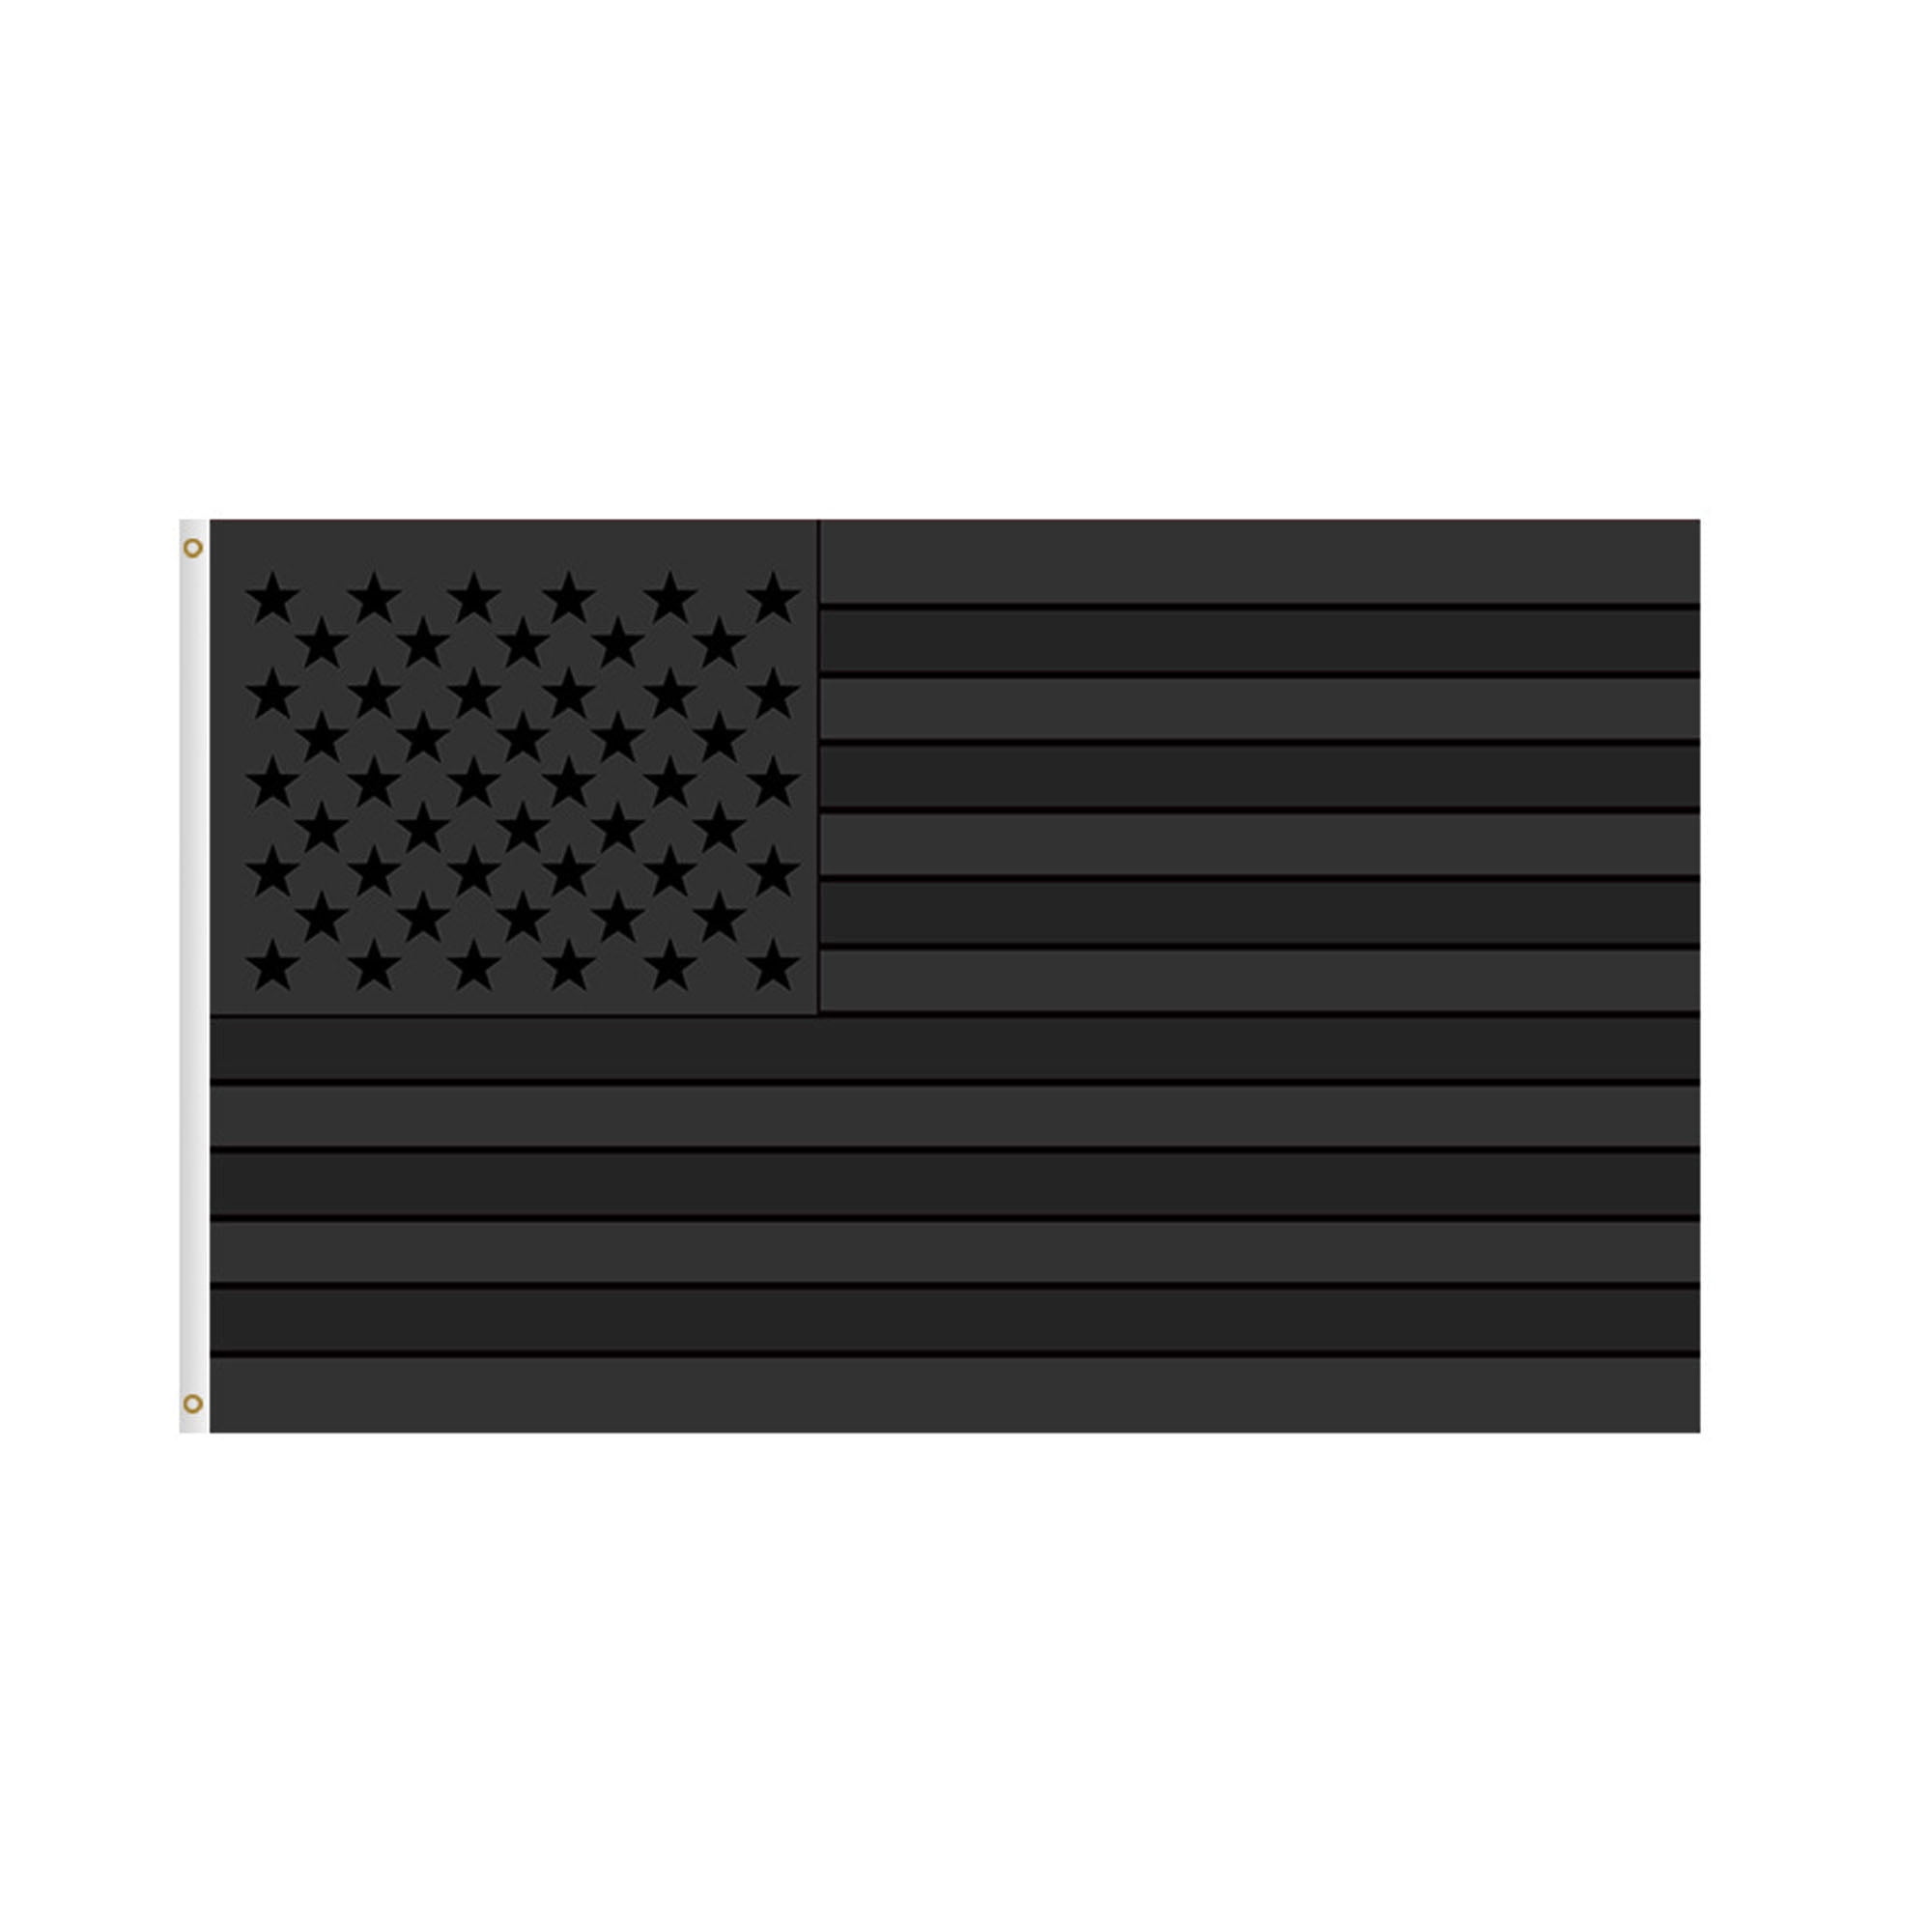 All Black American Flag 3x5 ft Oxford Cloth US Blackout Tactical 90x150cm 